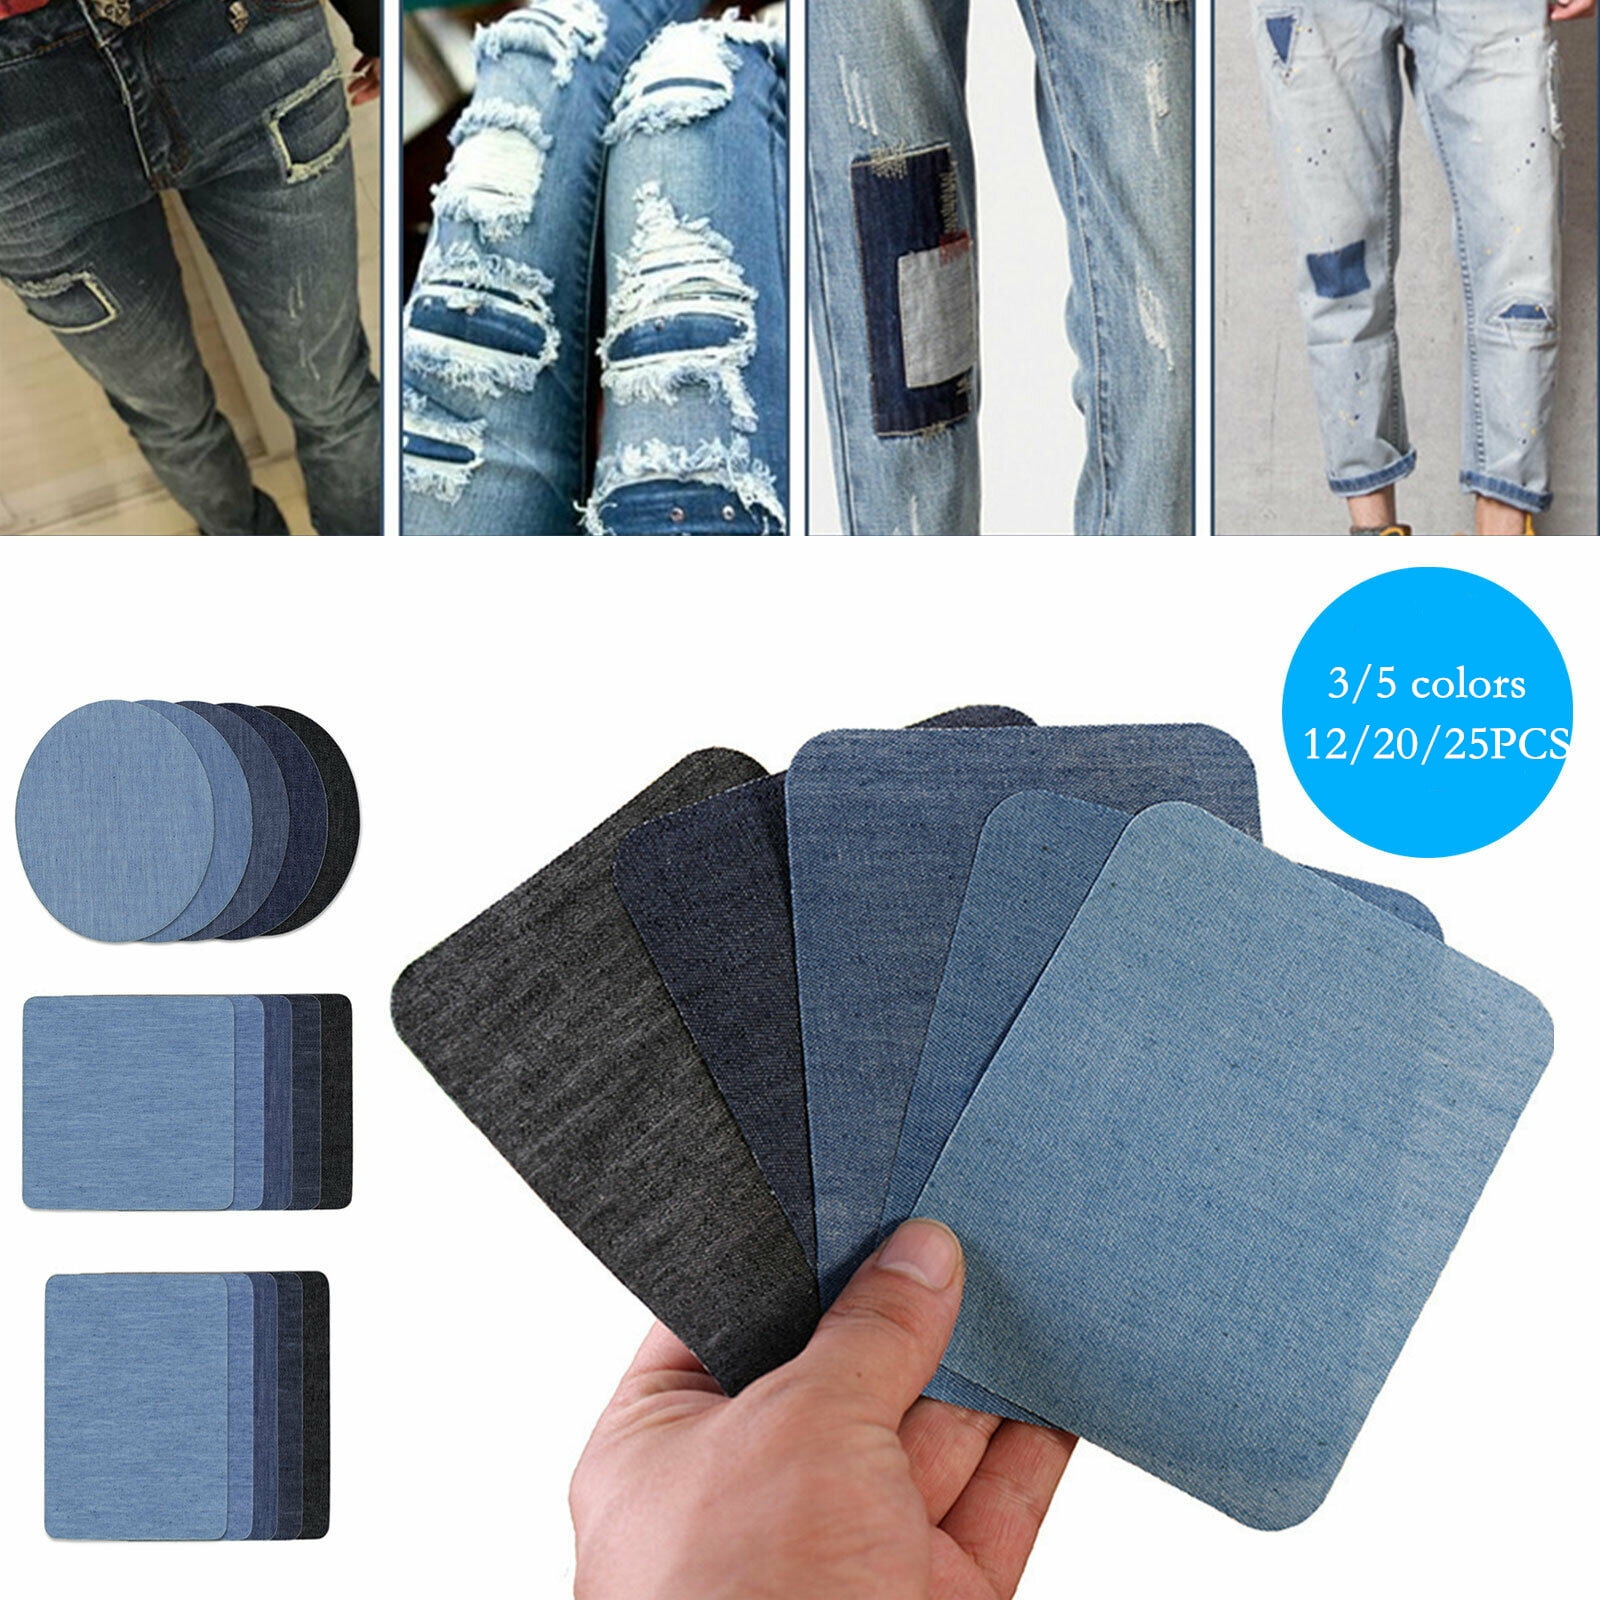 Iron On Denim Patches for Clothing Jeans 3 Colors 12 PCS, Denim Iron-on or  Sewing Jean Patches No-Sew Shades of Blue